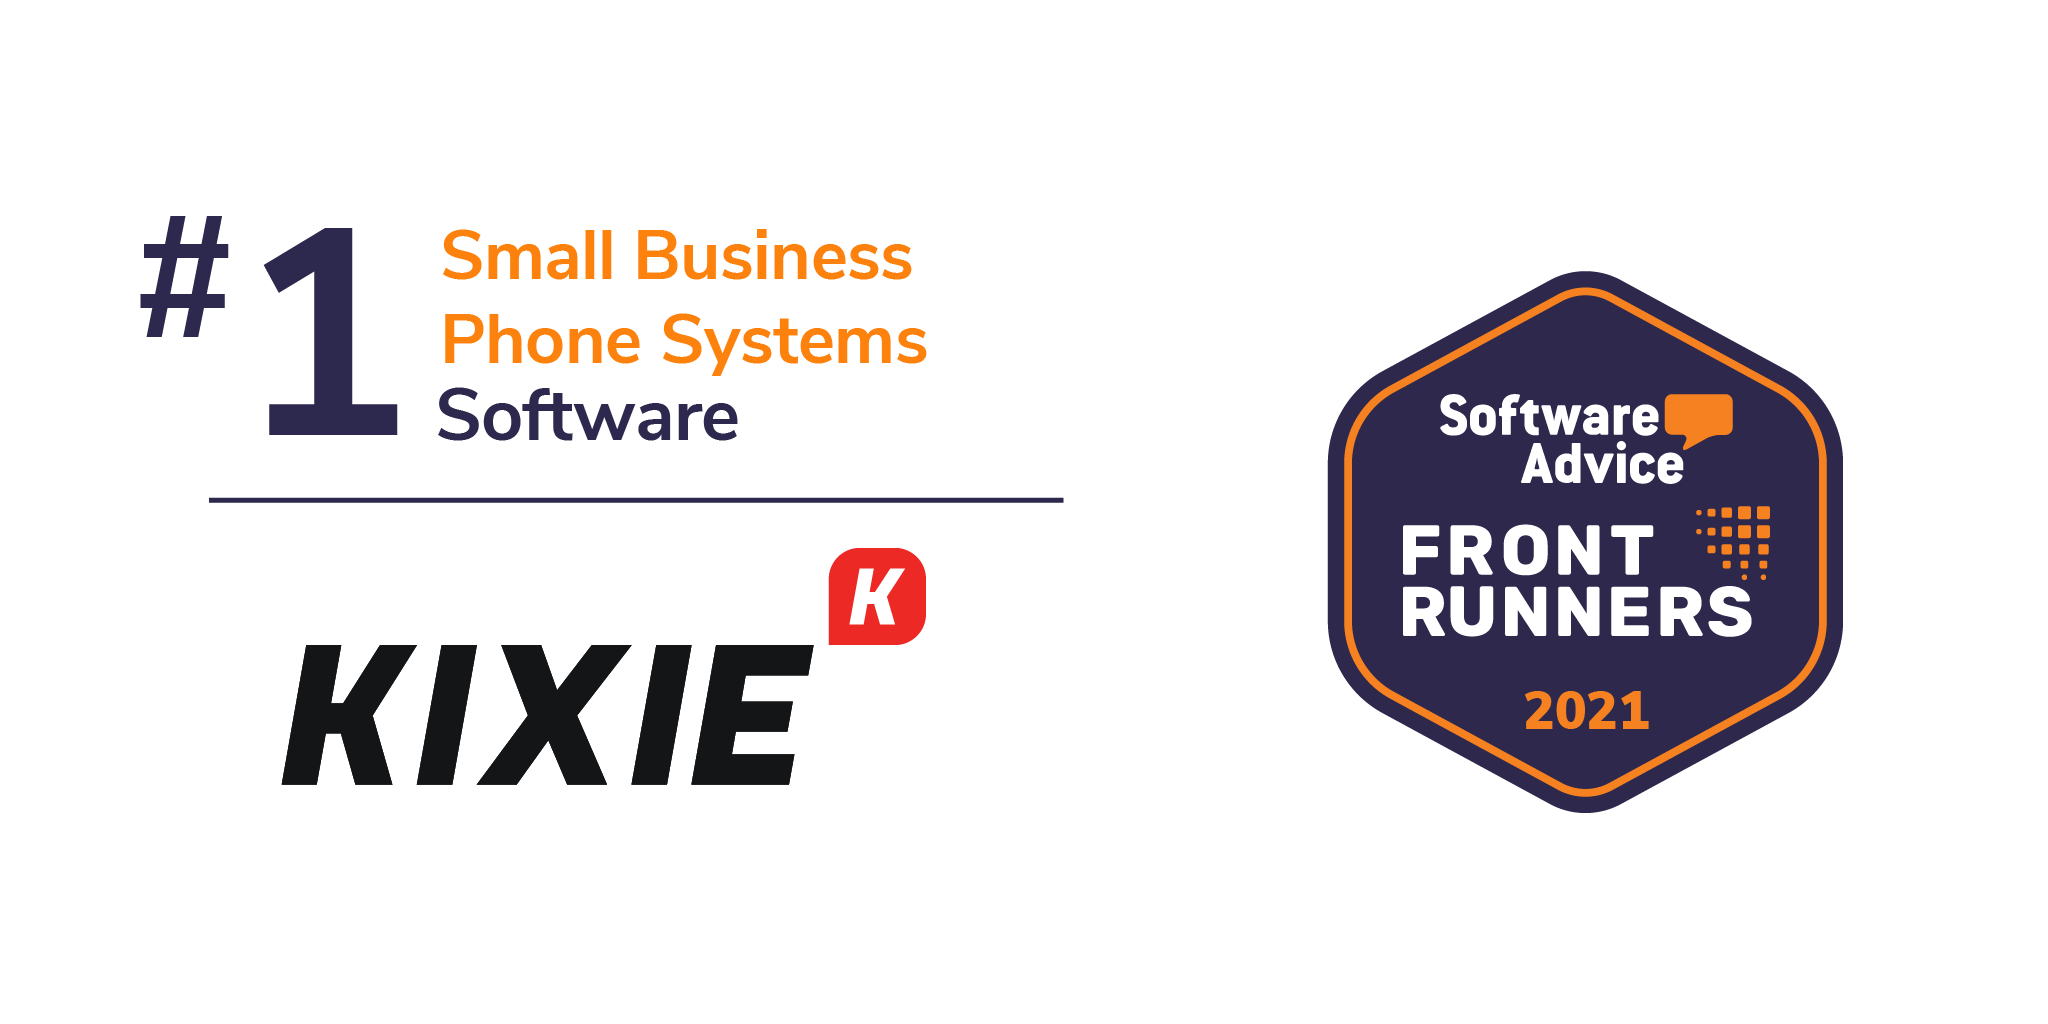 Kixie Named FrontRunner for Small Business Phone Systems Software  | Telephones for business